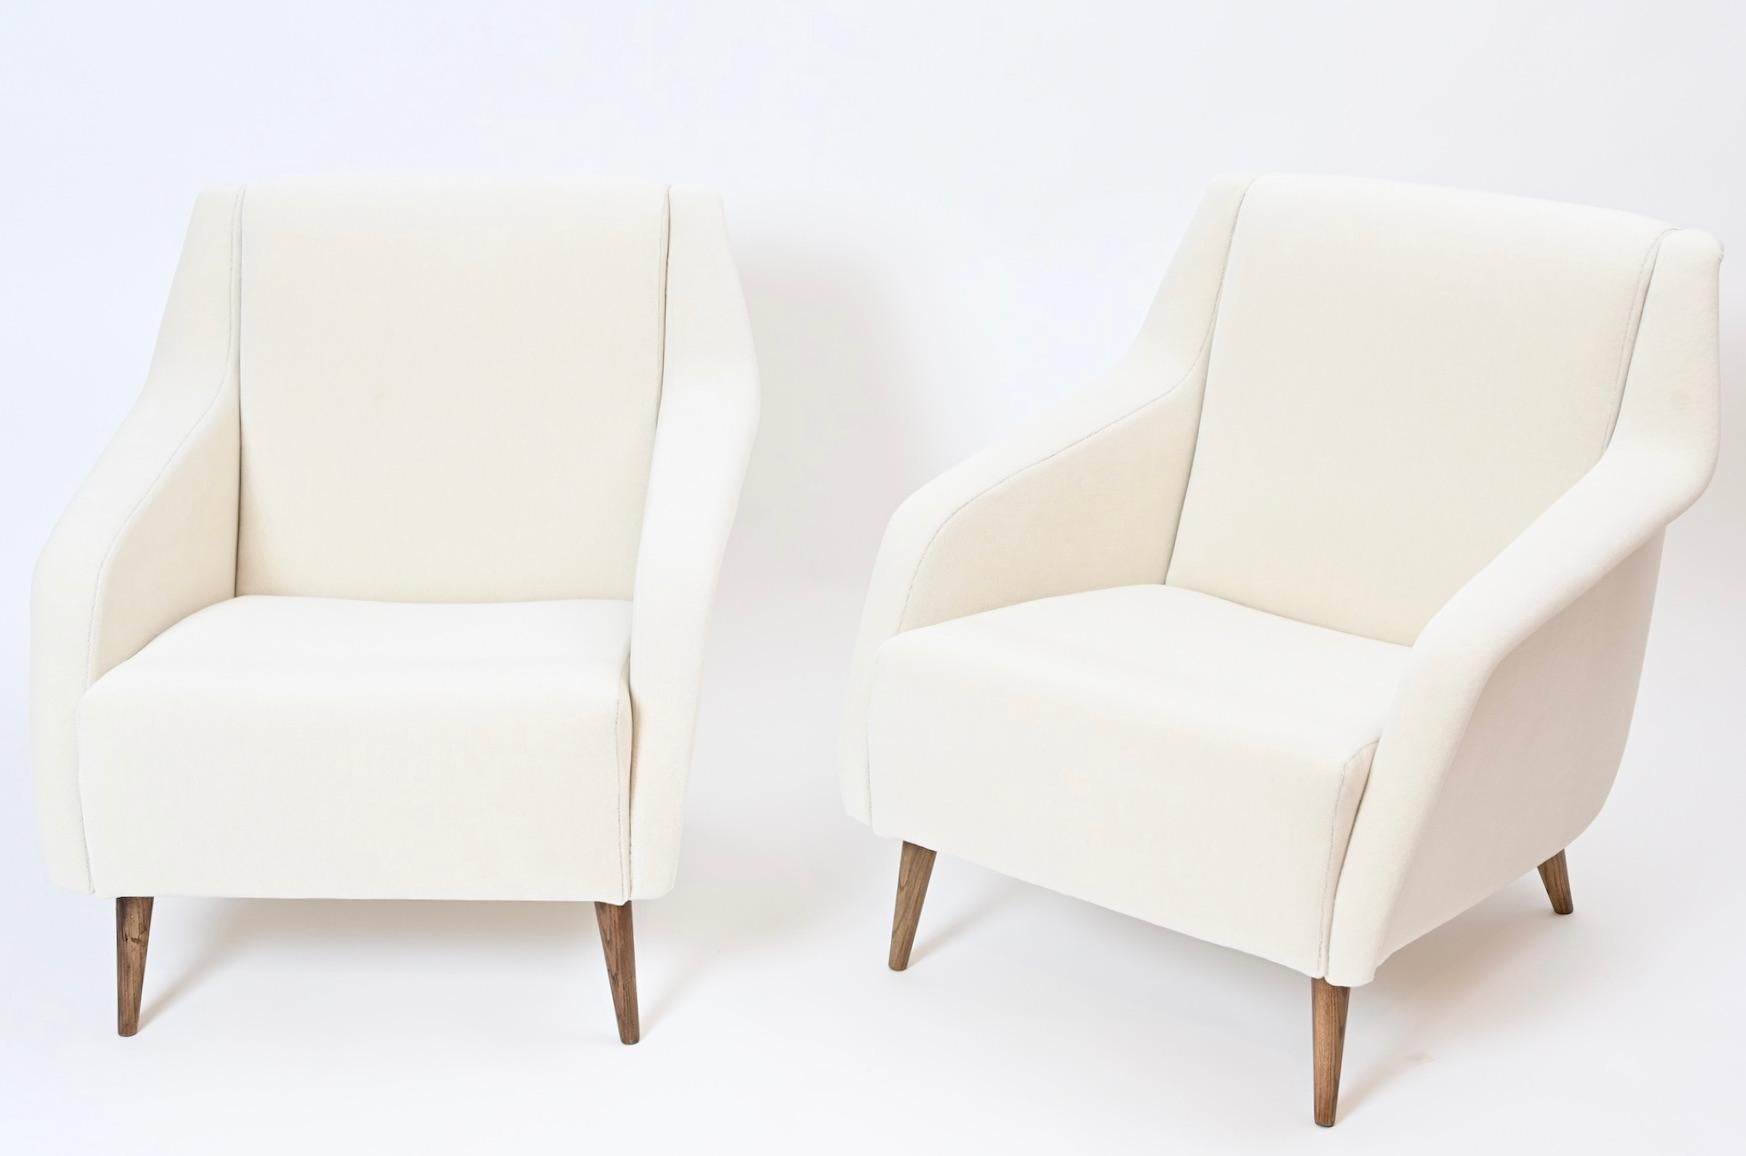 20th Century Pair of Carlo de Carli ‘802’ Lounge Chairs by Cassina, Italy, circa 1960